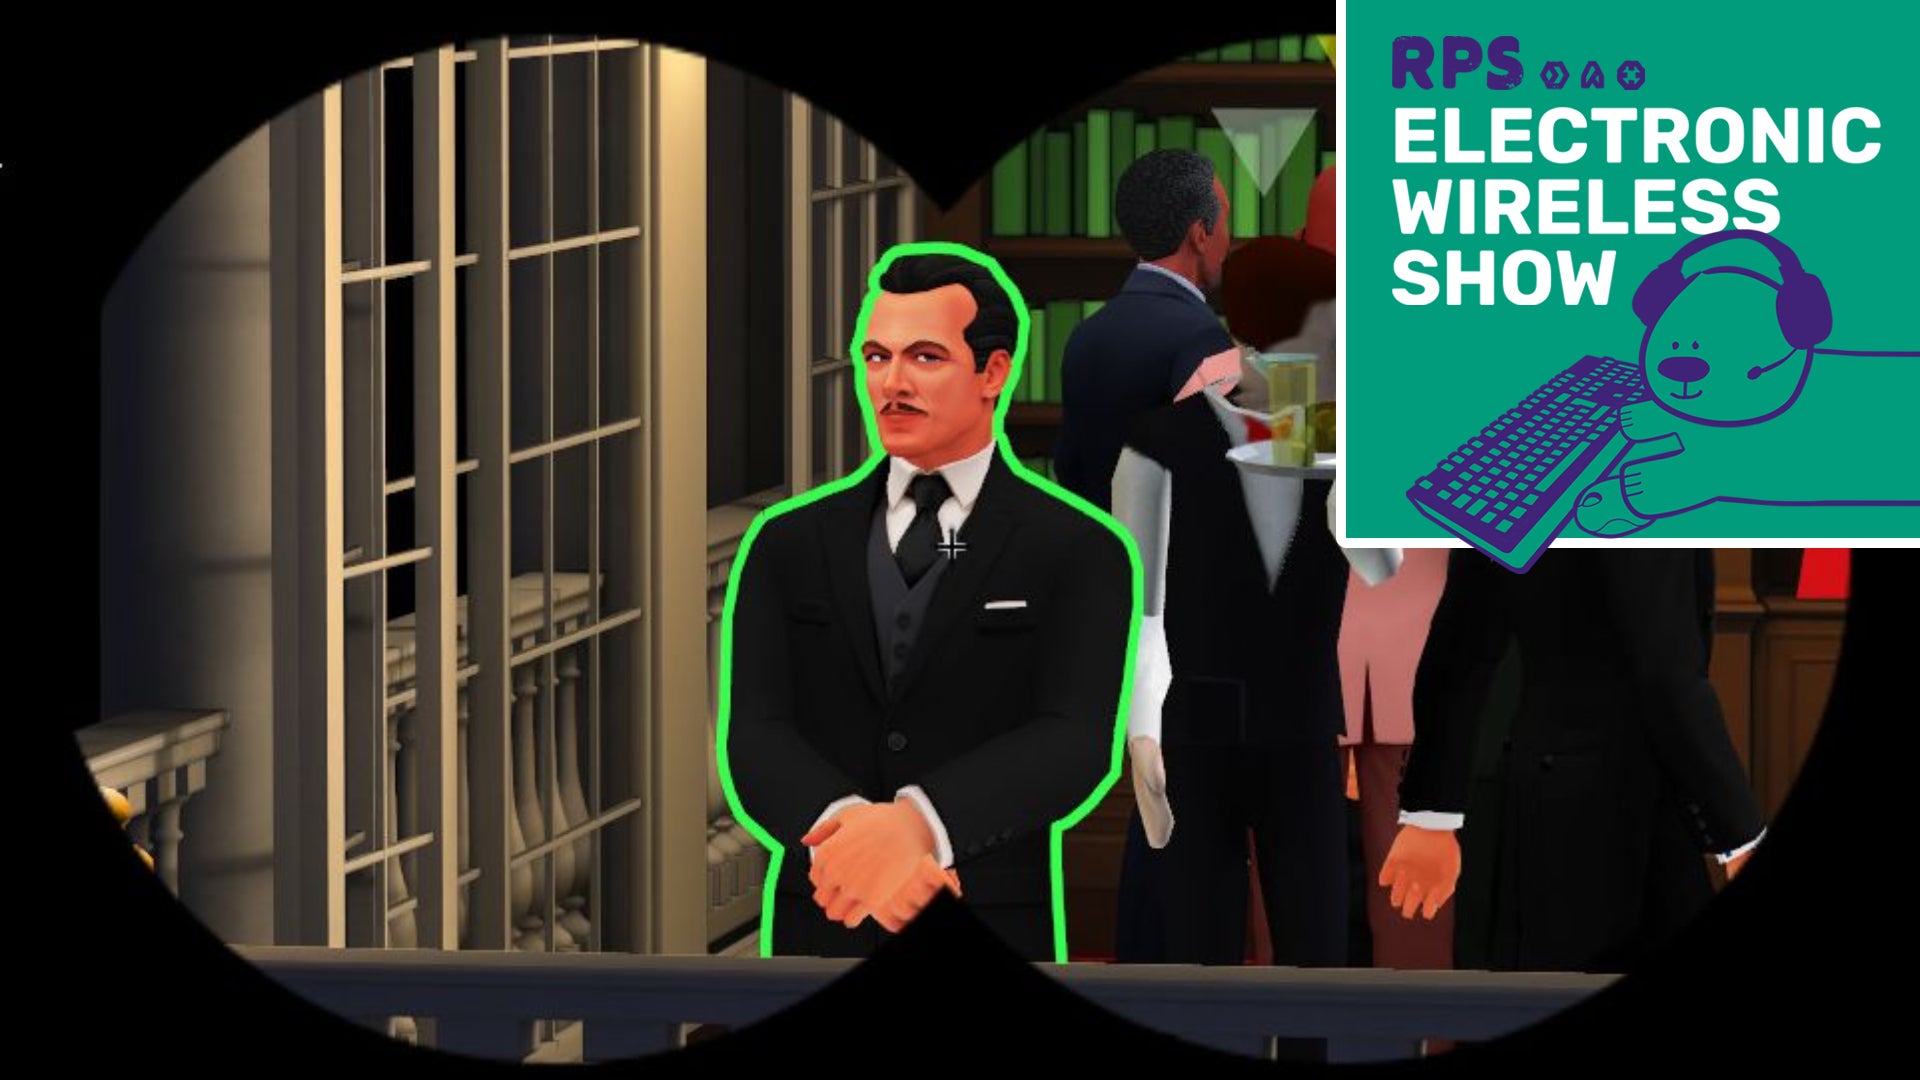 A character in Spy Party - a dapper man in black tie with a thin moustache - stands at a window. He is seen through the binoculars of the sniper outside.